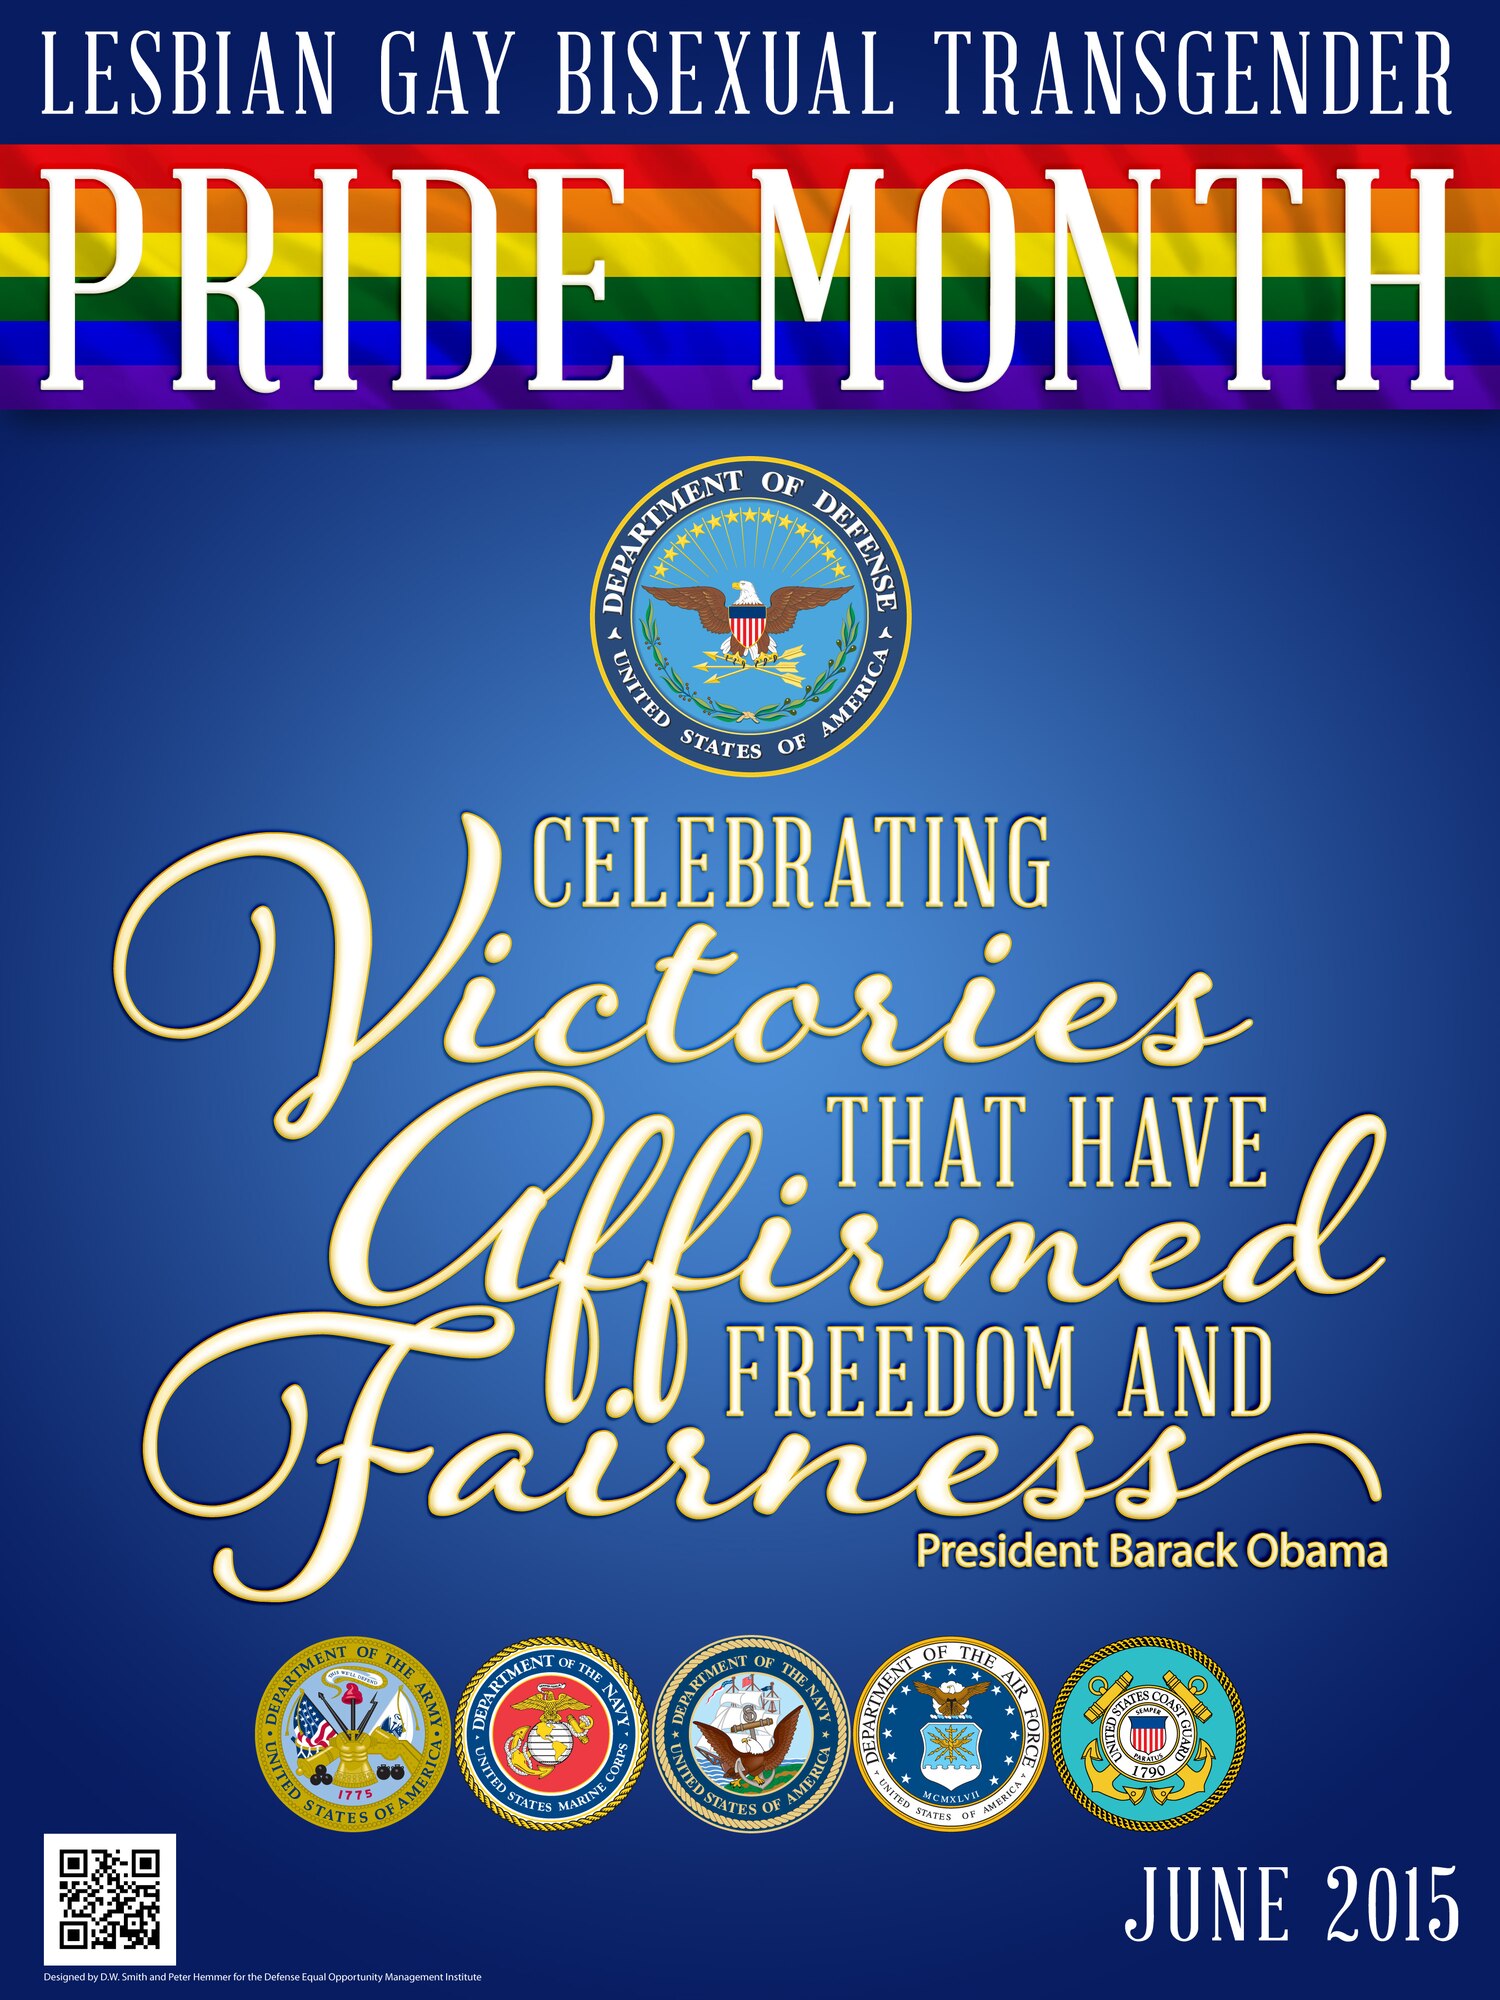 Lesbian, Gay, Bisexual and Transgender Pride Month has been nationally recognized every June since 2009. In 2010, President Barack Obama’s administration repealed “Don’t Ask Don’t Tell,” allowing LGBT military members to serve openly. This year is Moody’s first time celebrating LGBT Pride Month. (Courtesy photo illustration provided by Defense Equality Opportunity Management Institute)